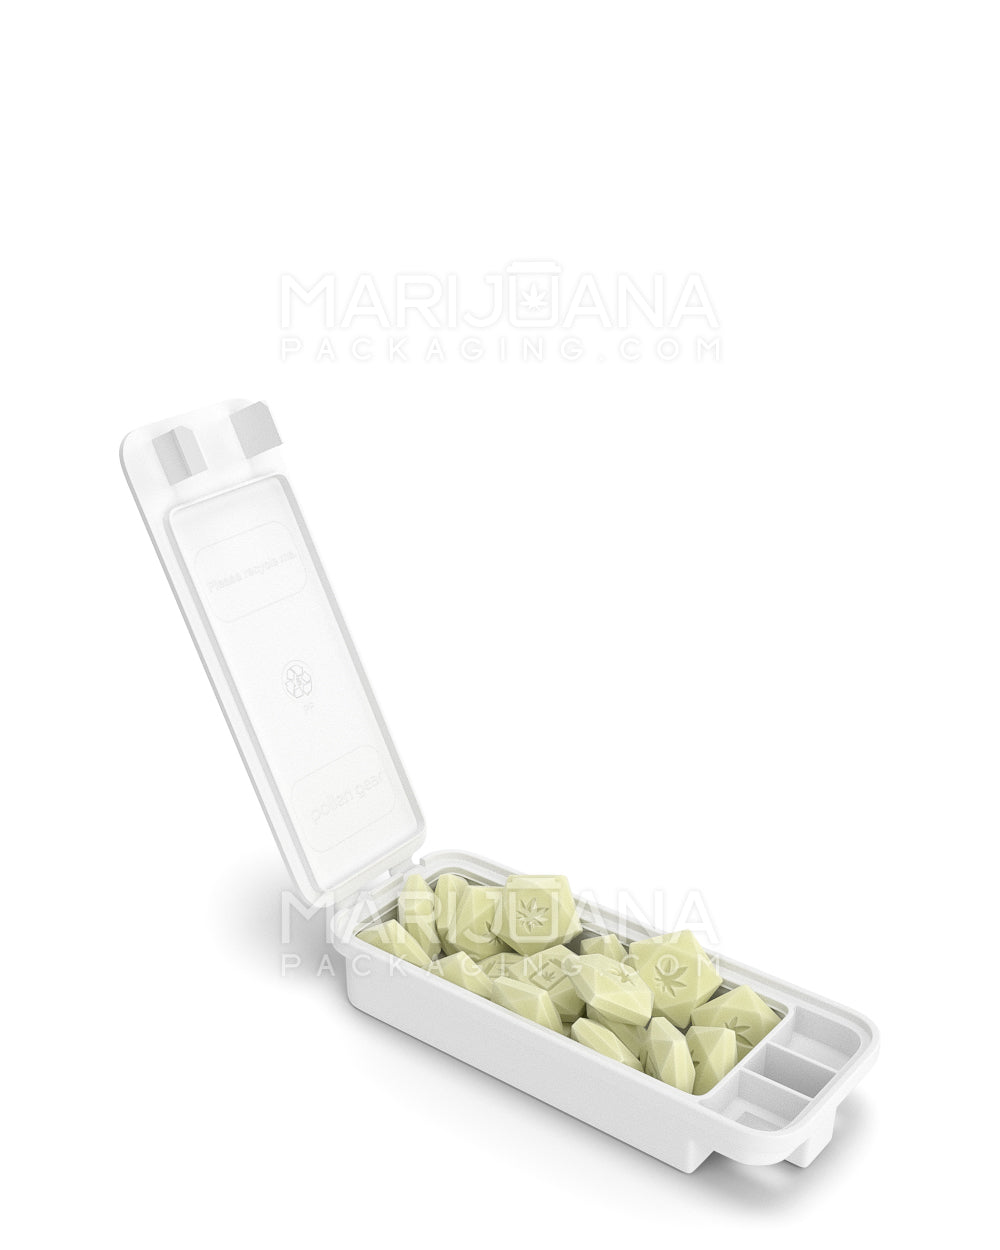 Child Resistant | Snap Box Edible & Pre-Roll Joint Case | Small - White Plastic - 240 Count - 3